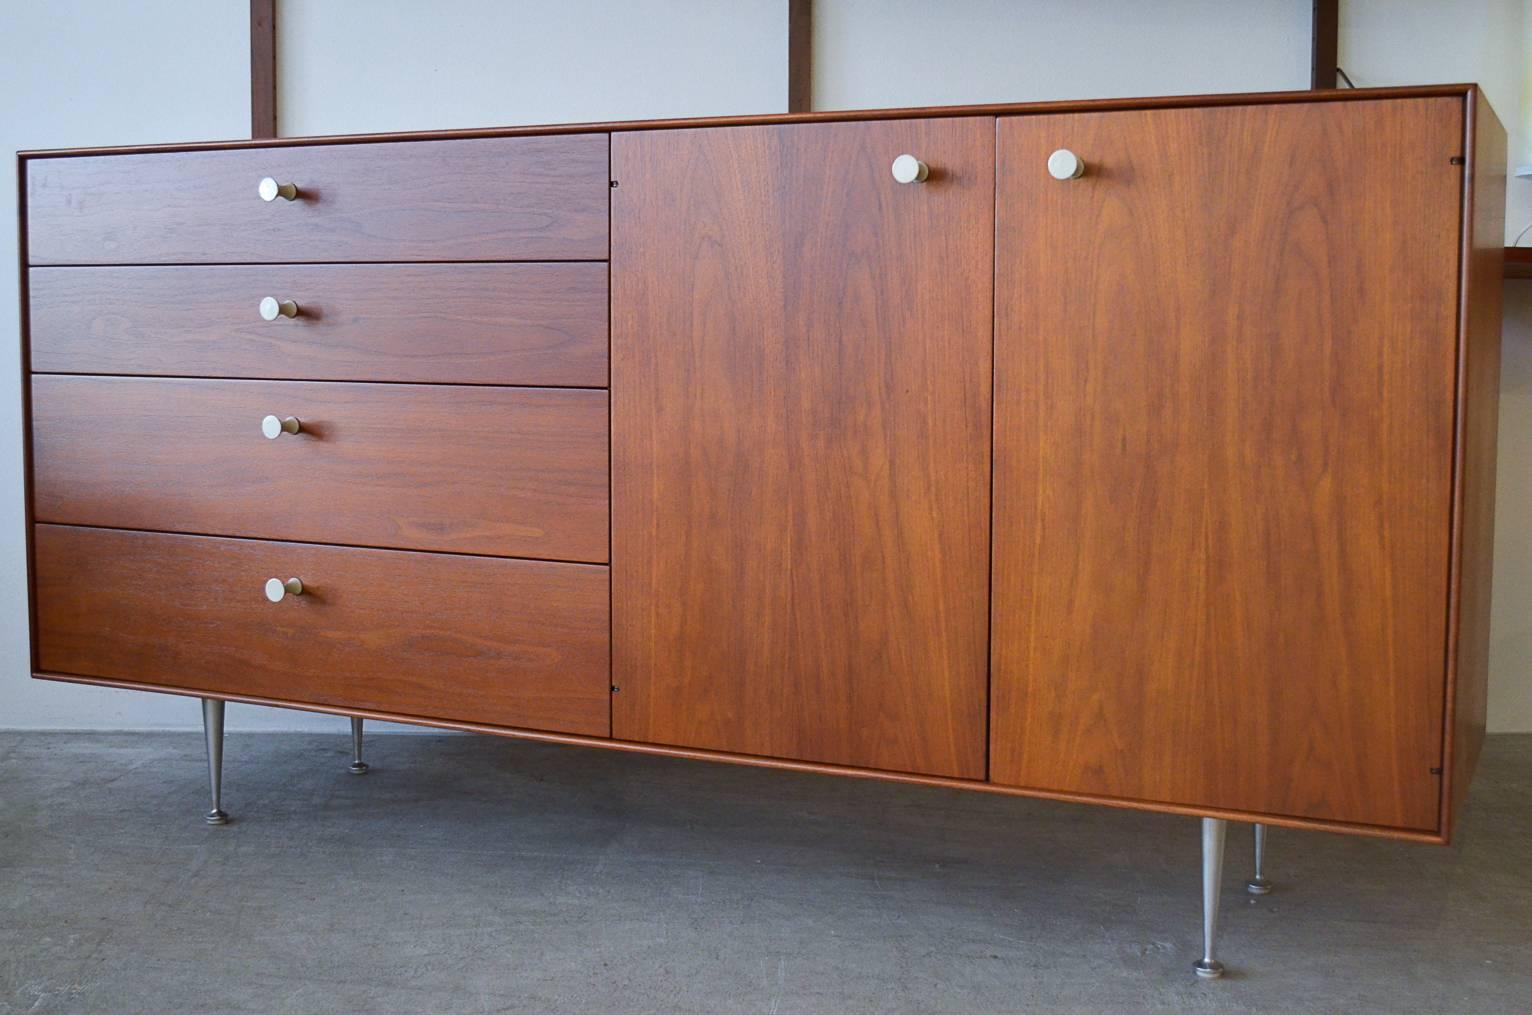 George Nelson for Herman Miller Thin Edge walnut credenza with original hardware and brushed aluminum legs. Fully restored wood in showroom condition.

Measures 67